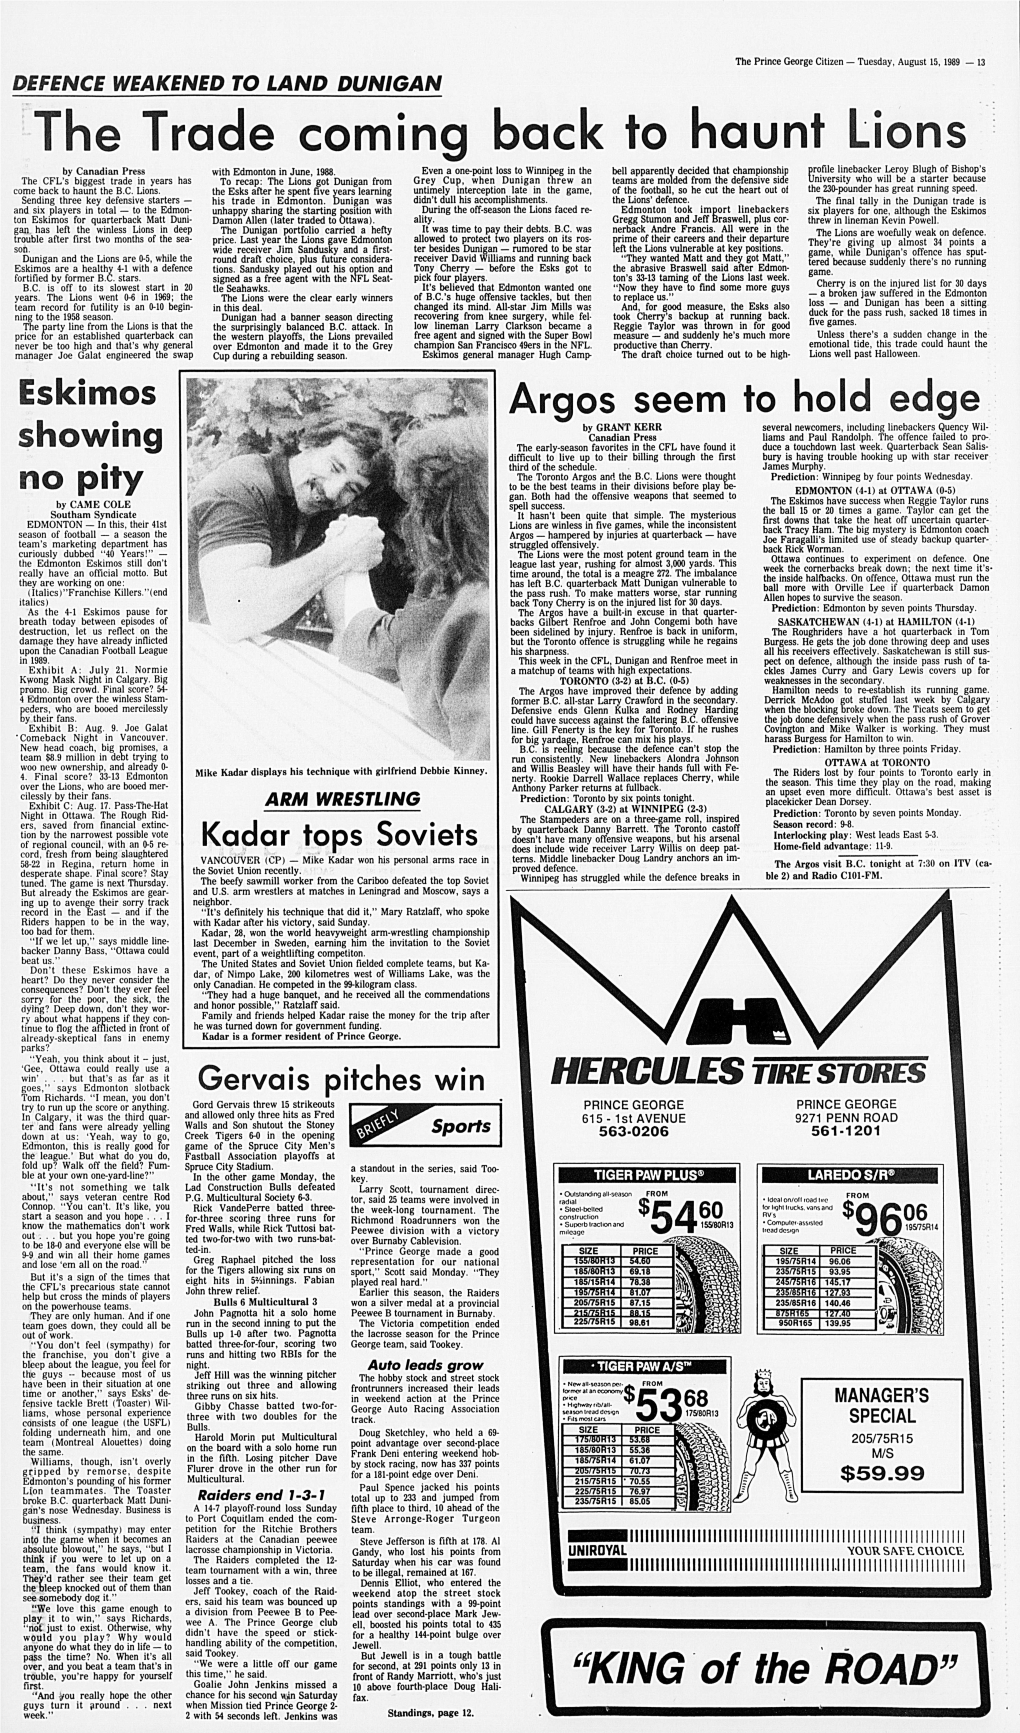 The Trade Coming Back to Haunt Lions by Canadian Press with Edmonton in June, 1988